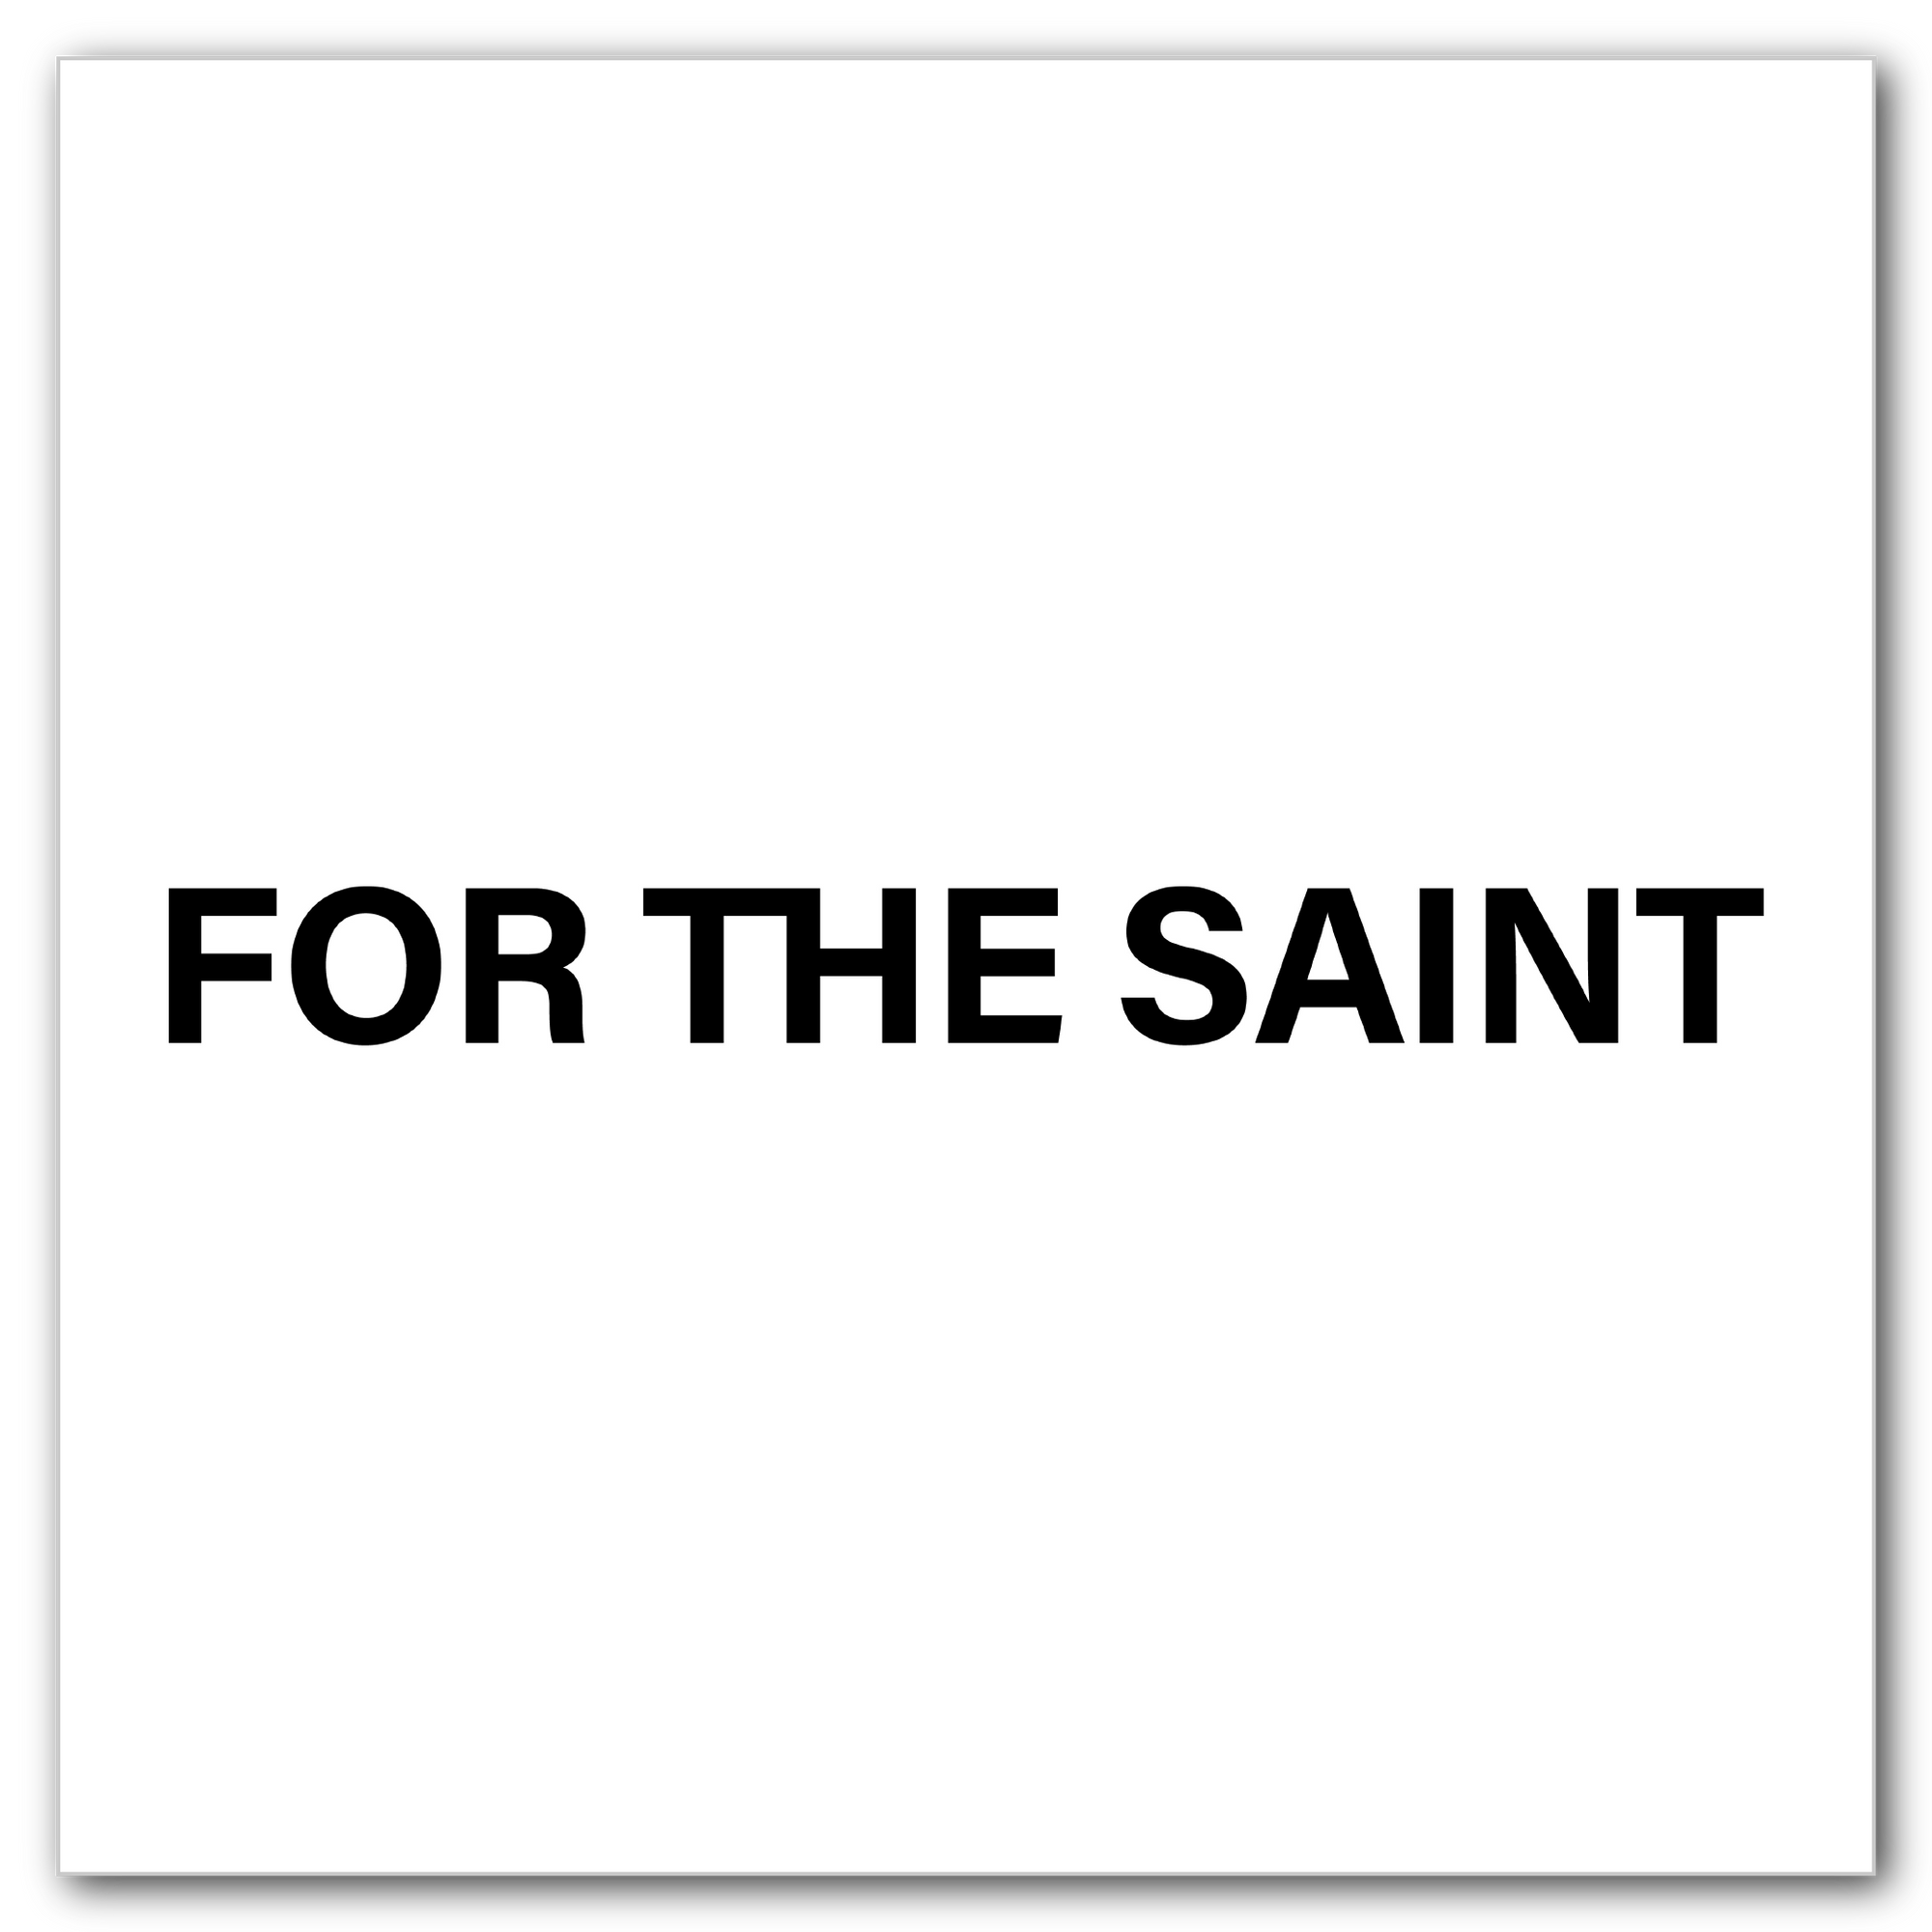 For the Saint